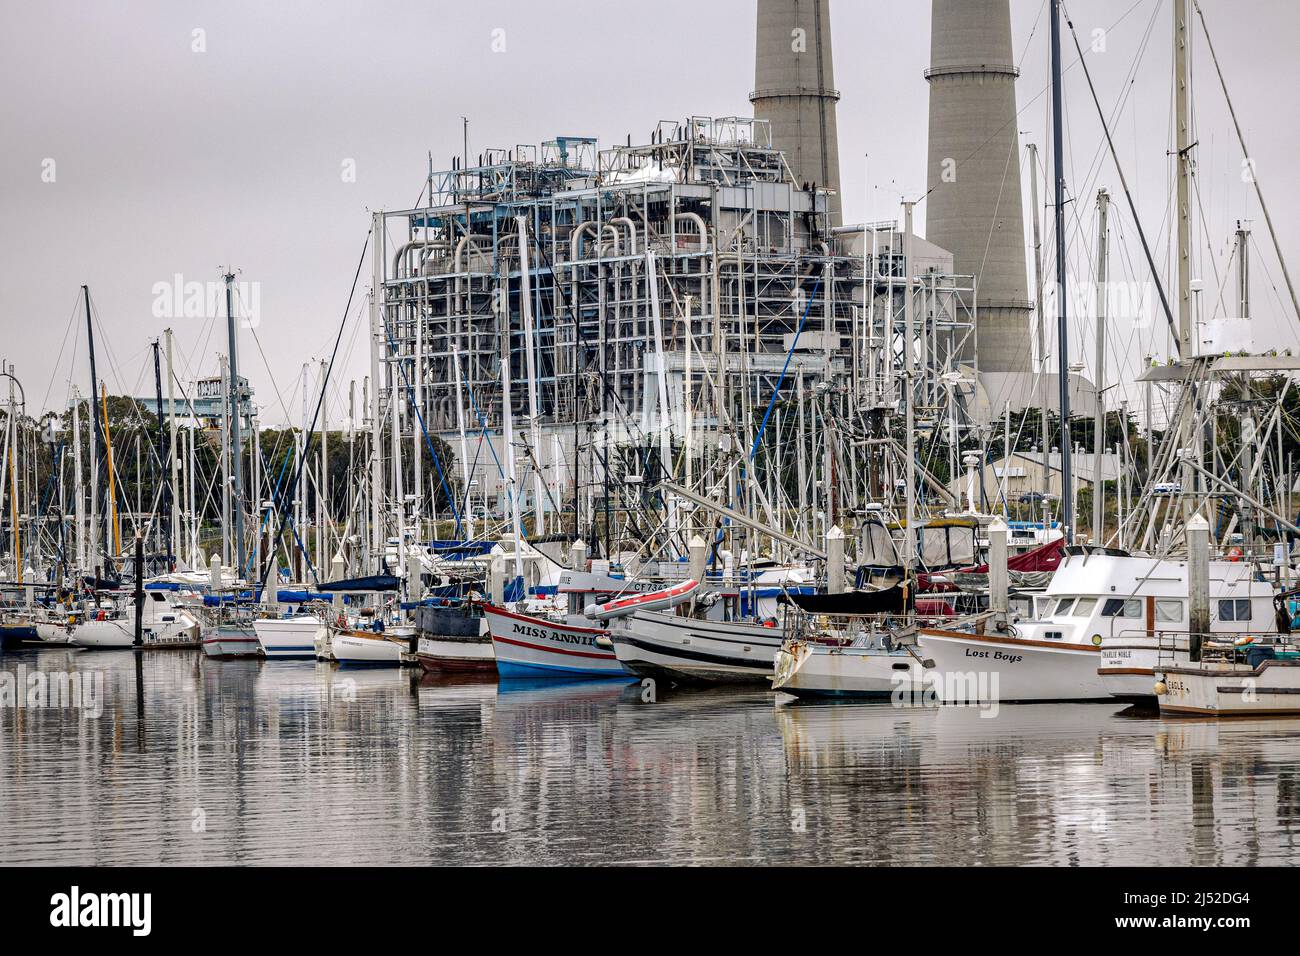 Boats docked at Moss Landing harbor CA with the power plant in the background Stock Photo